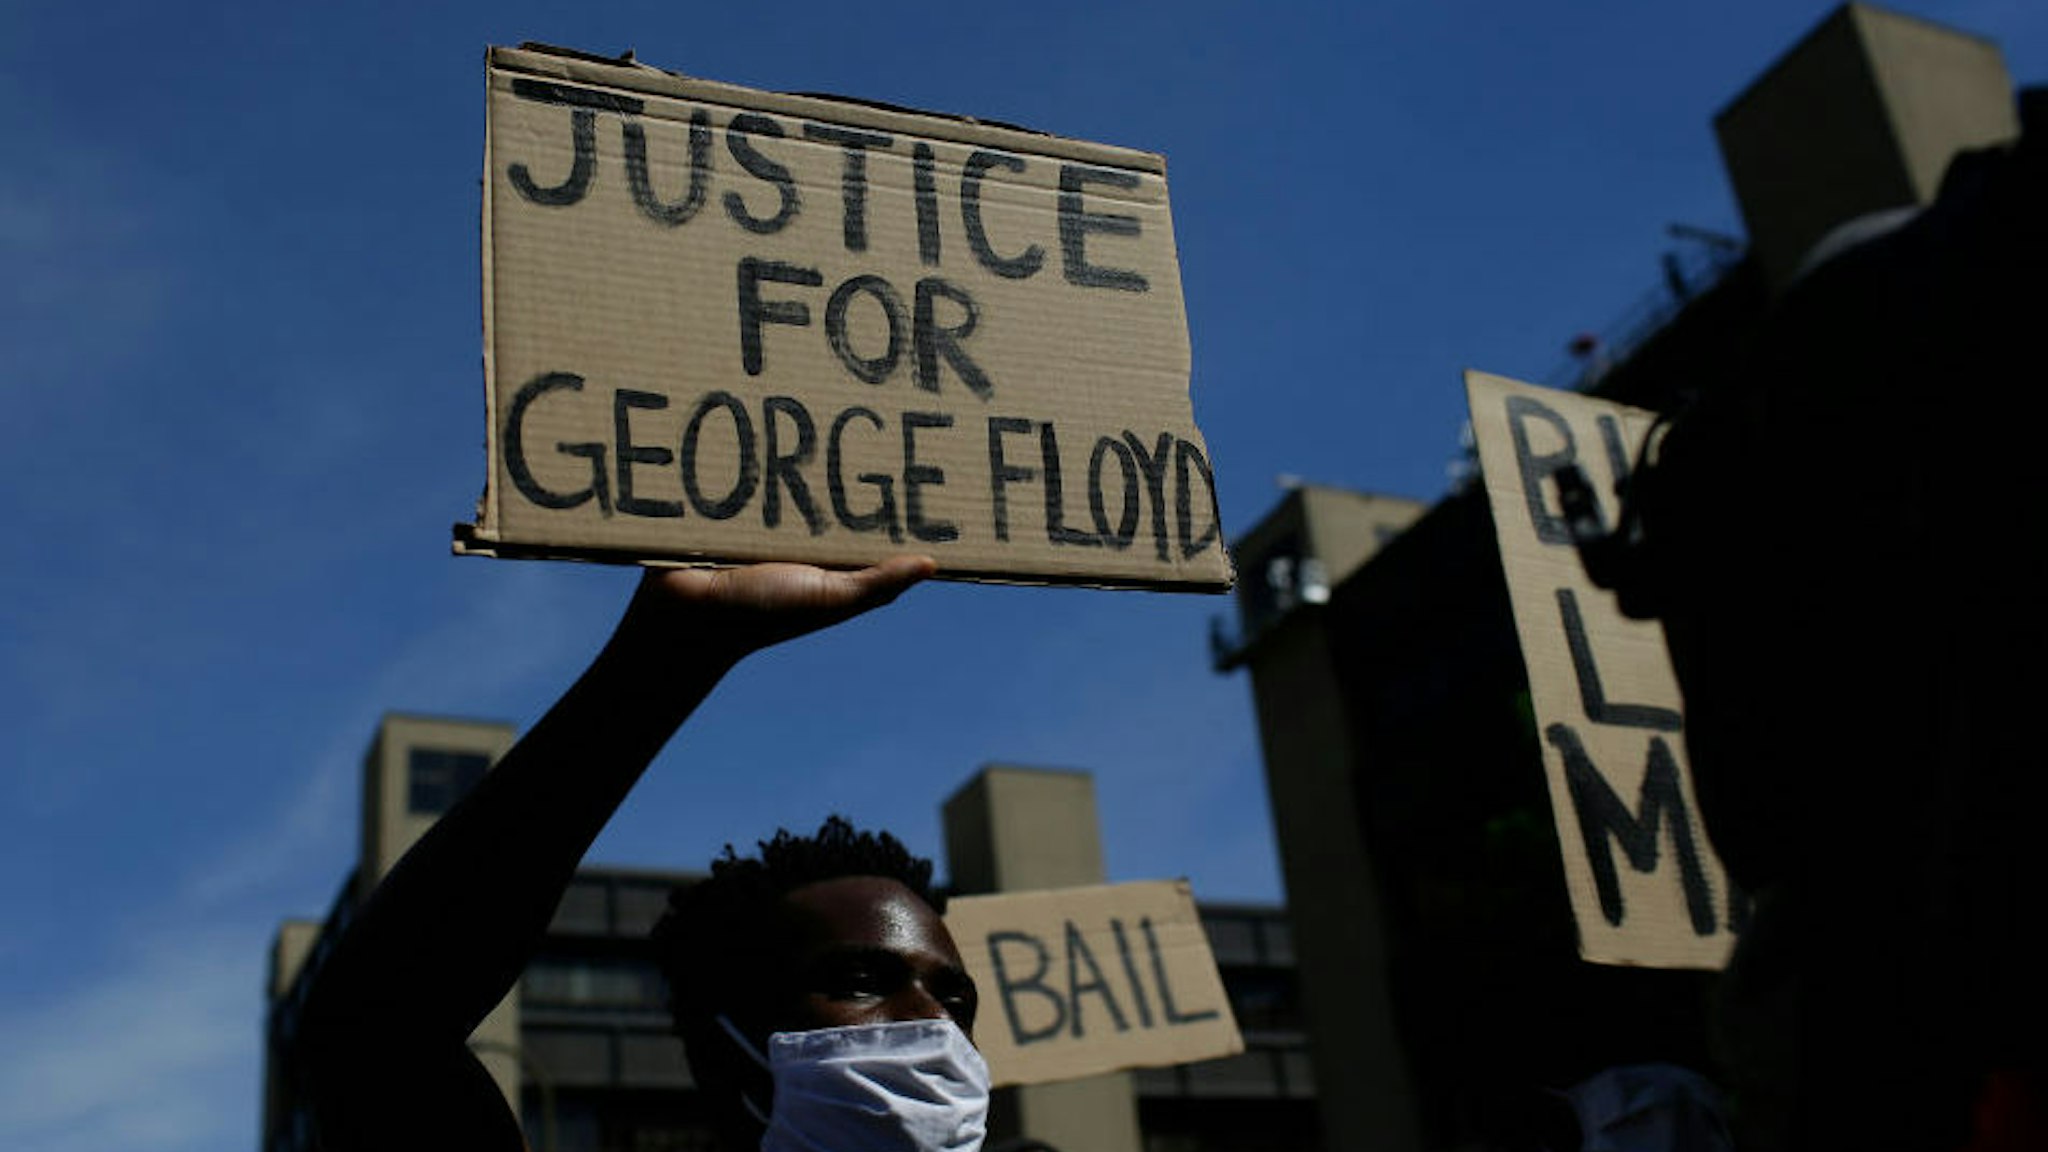 Protesters demonstrate against the death of George Floyd on May 31, 2020 in Minneapolis, Minnesota.